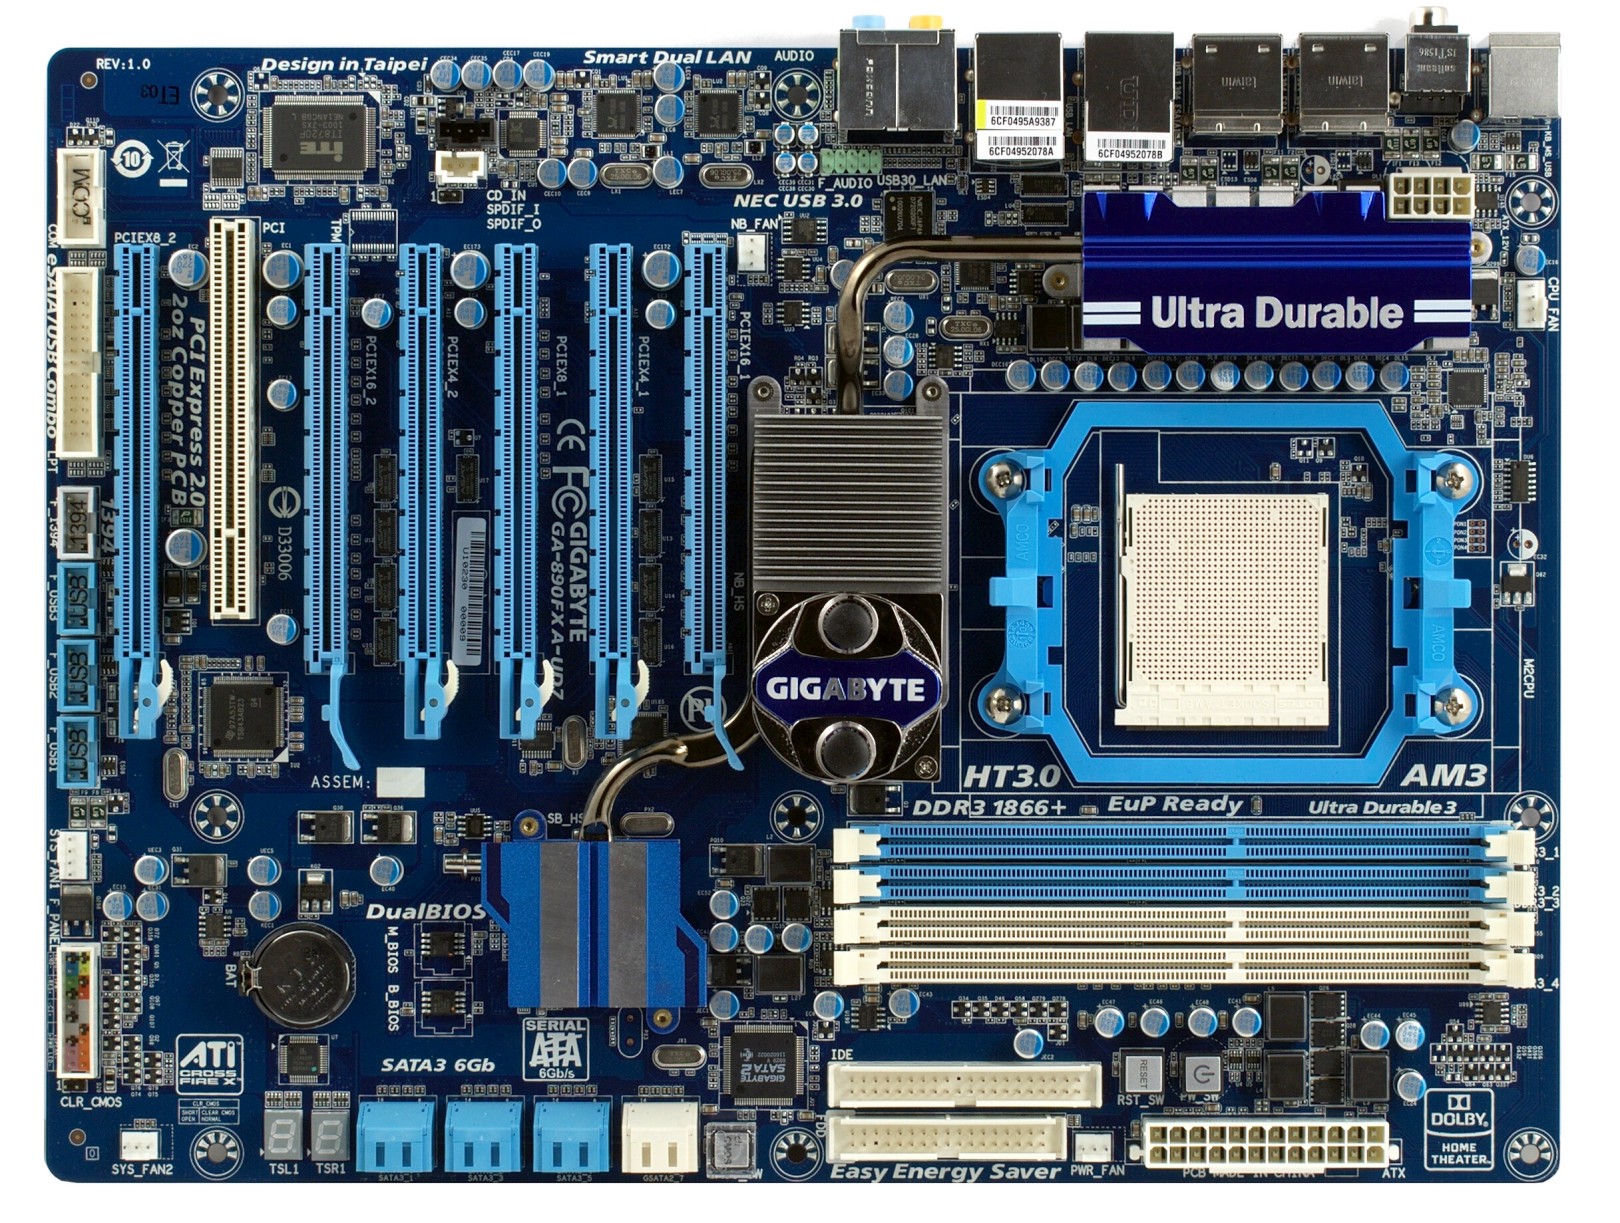 Post the sexiest AMD motherboard! - Page 7